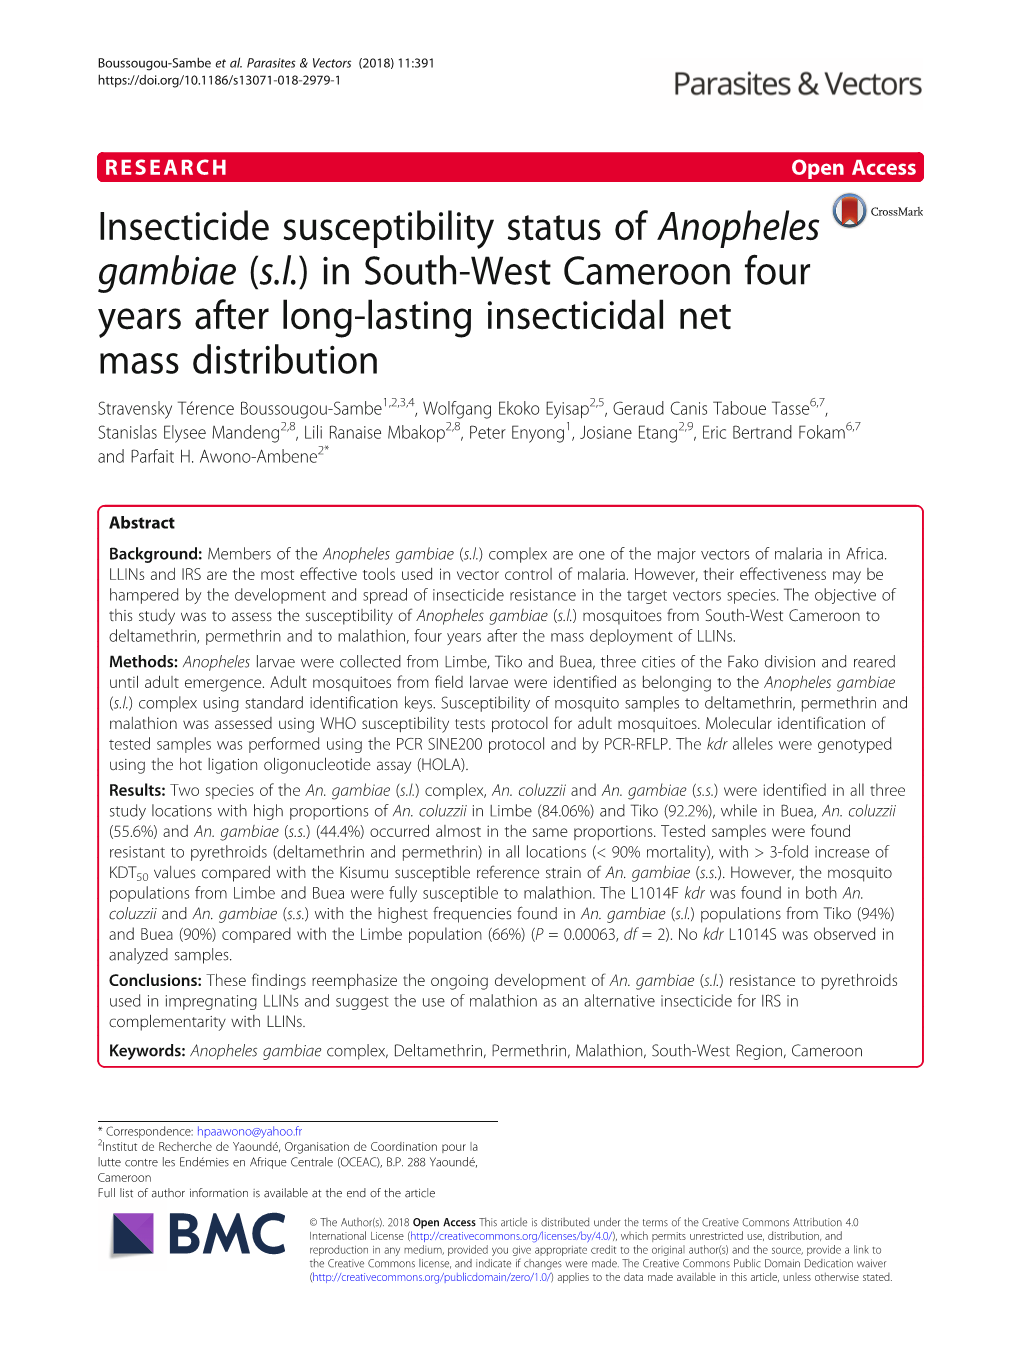 Insecticide Susceptibility Status of Anopheles Gambiae (Sl)